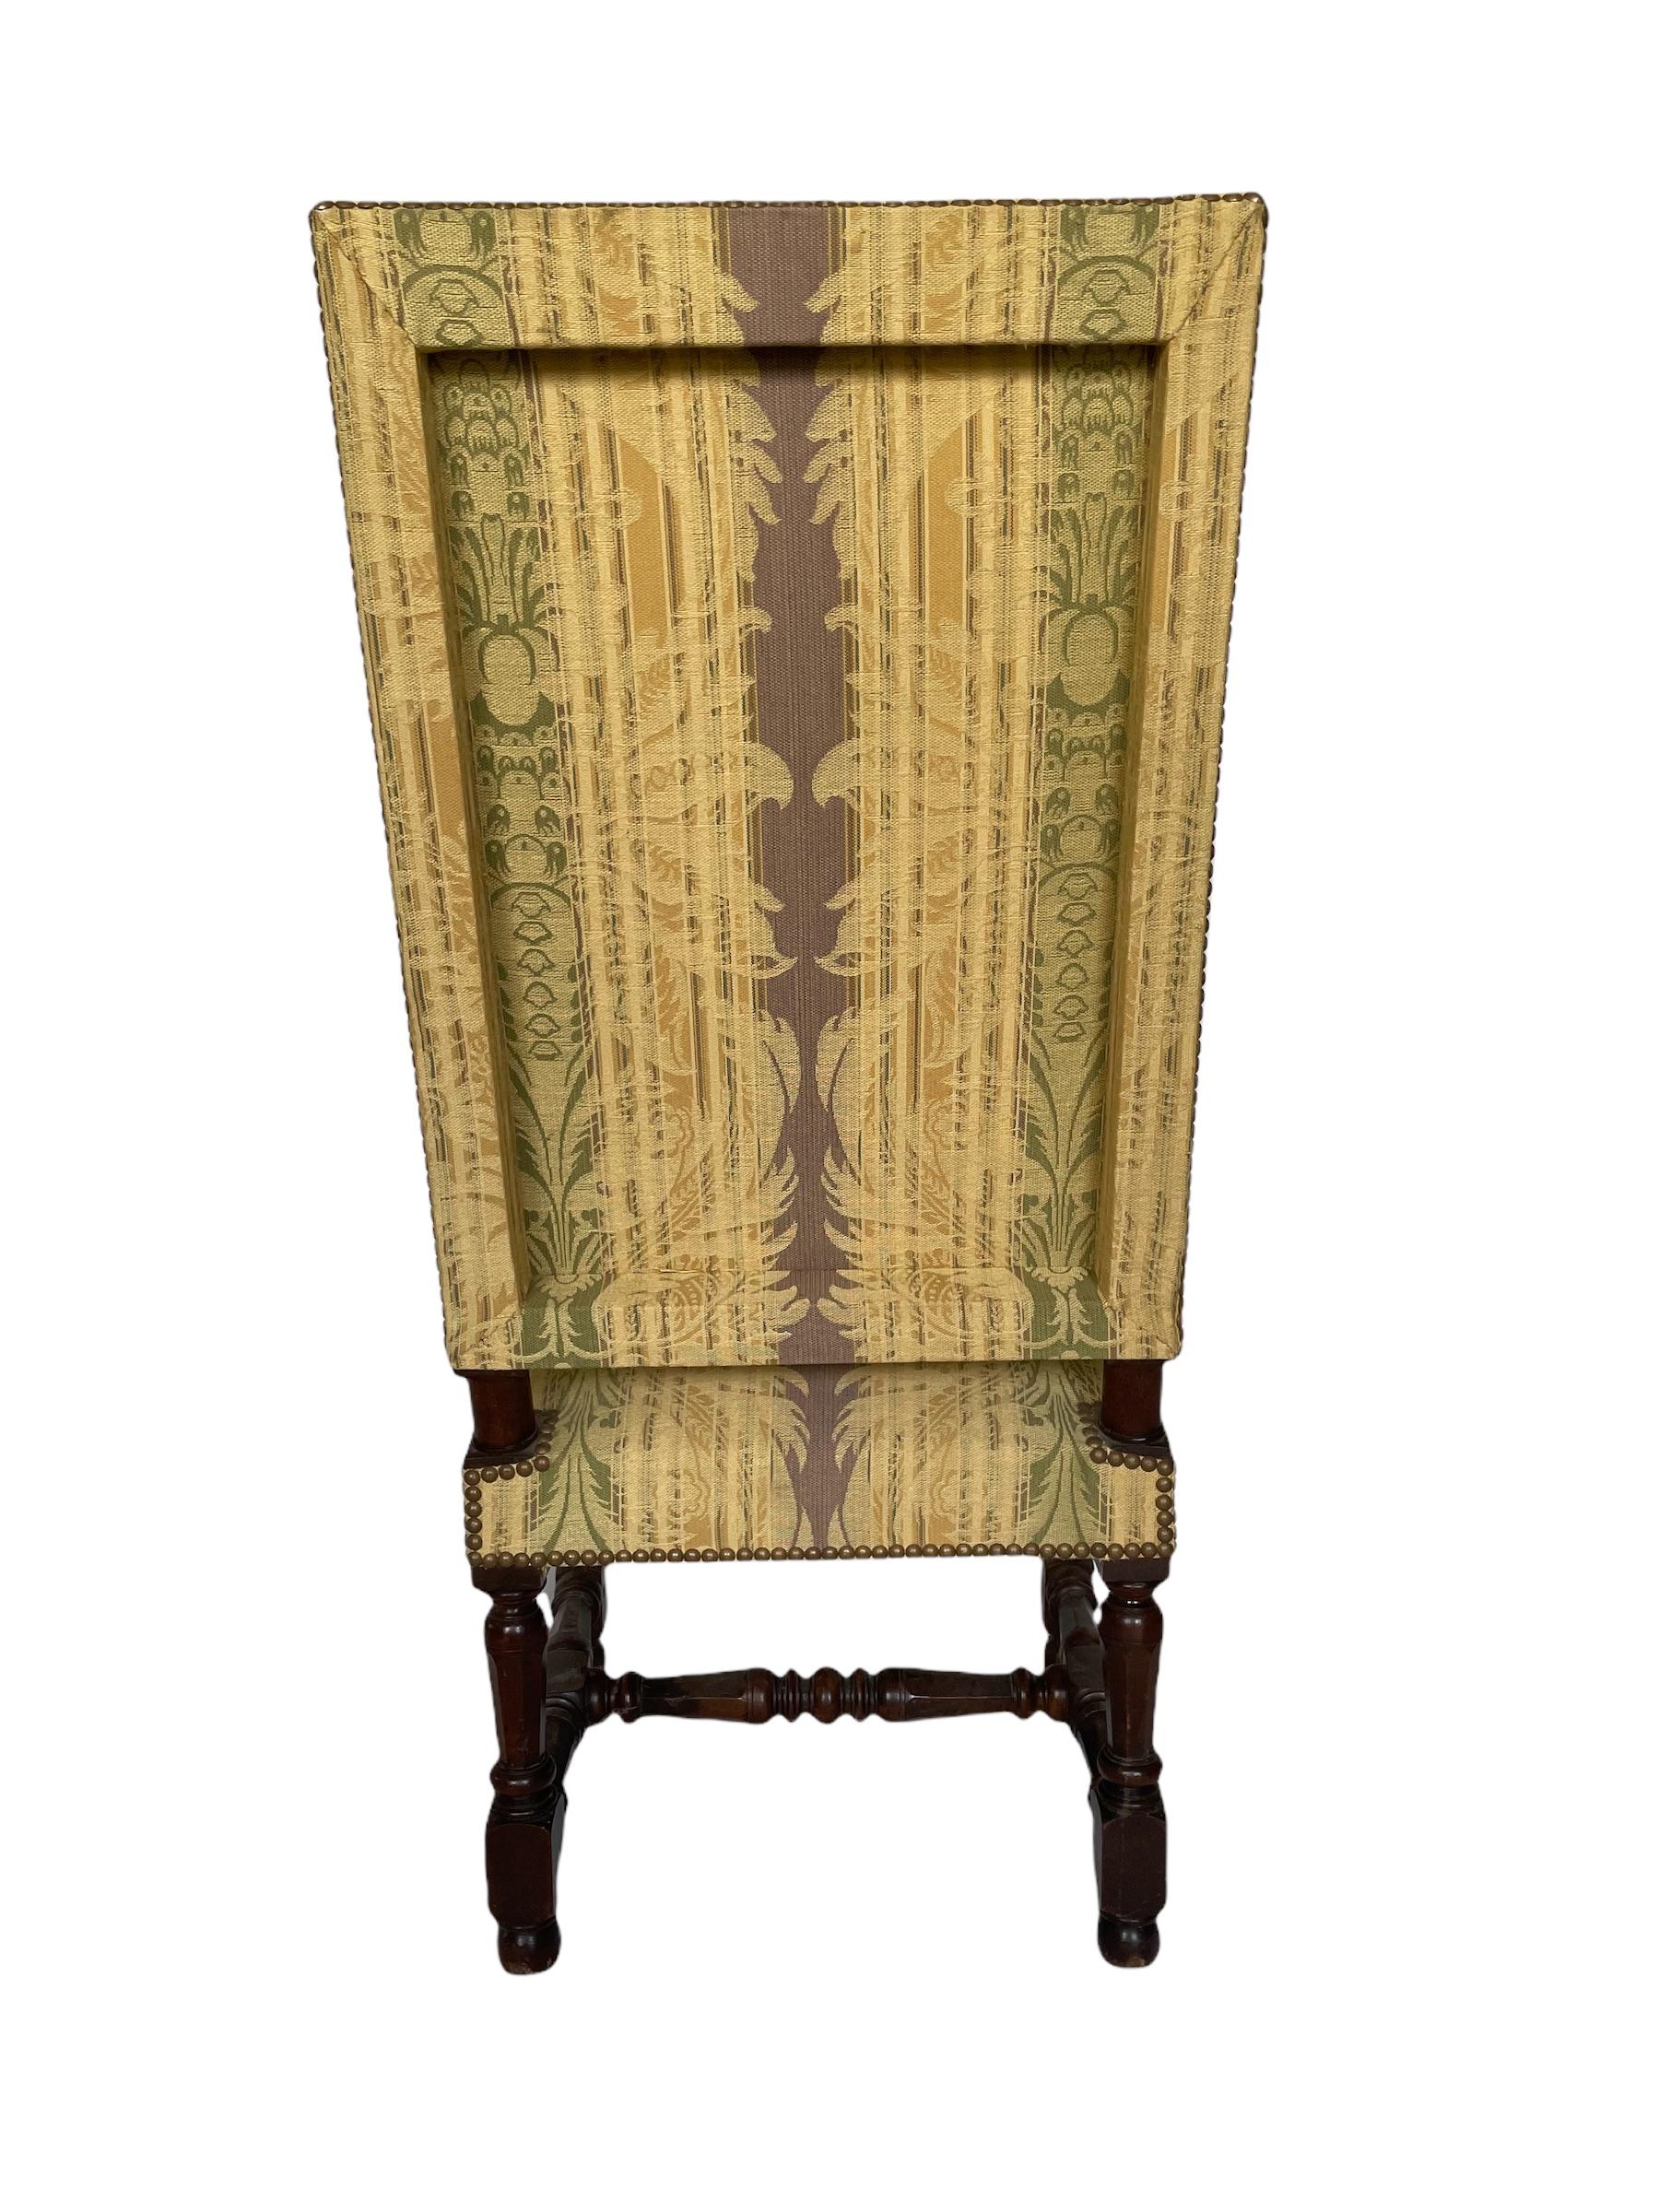 Beautiful French walnut chair from the 17th century, with twisted legs and cushioned seats. The chairback is nicely done and openly worked in three parts. The cushioned seats are in mustard tones and rich in details, the pattern represents acanthus